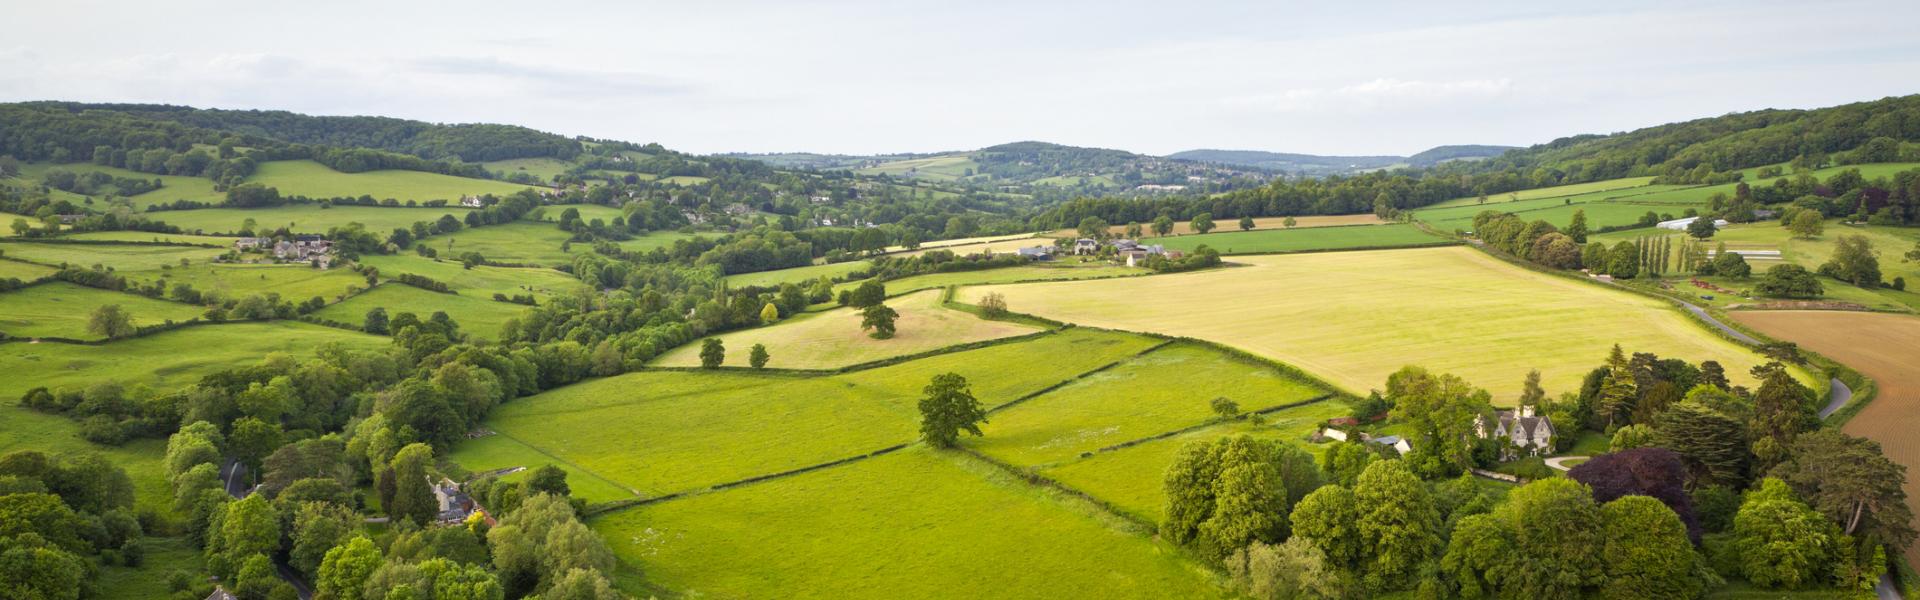 Holiday lettings & accommodation in Painswick - HomeToGo